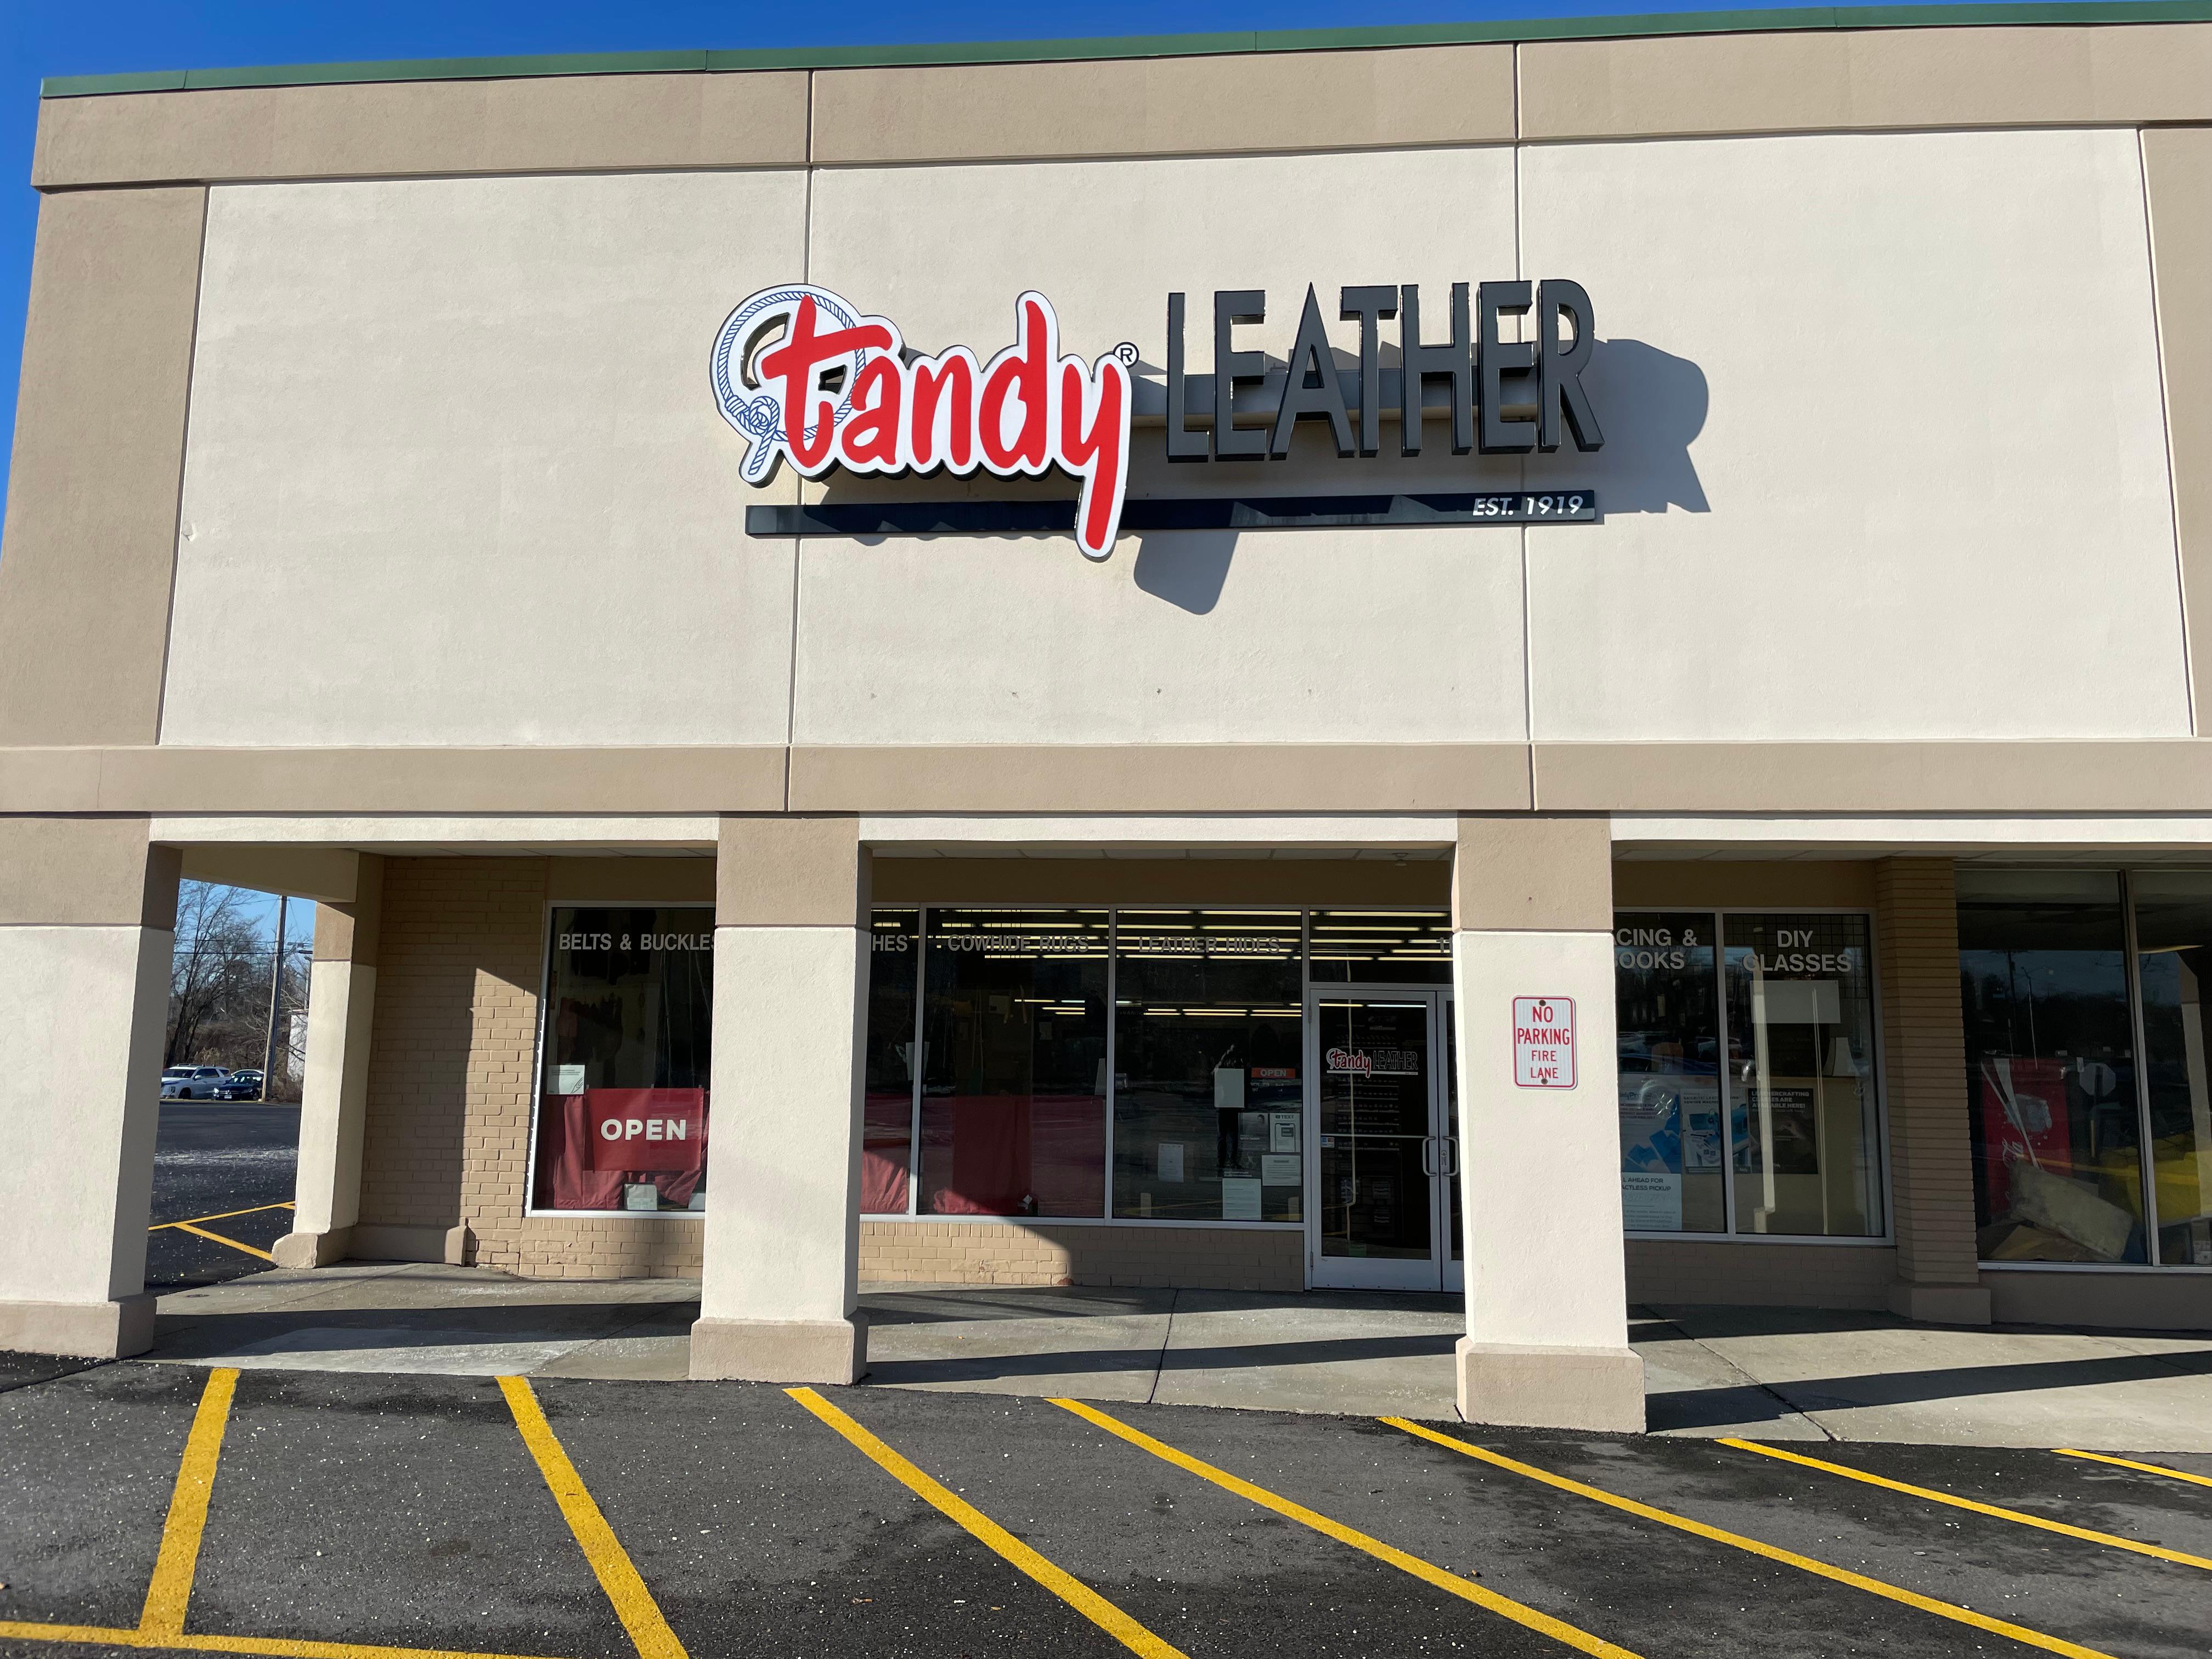 The Tandy Leather Museum of Fort Worth – The Leather Retailers